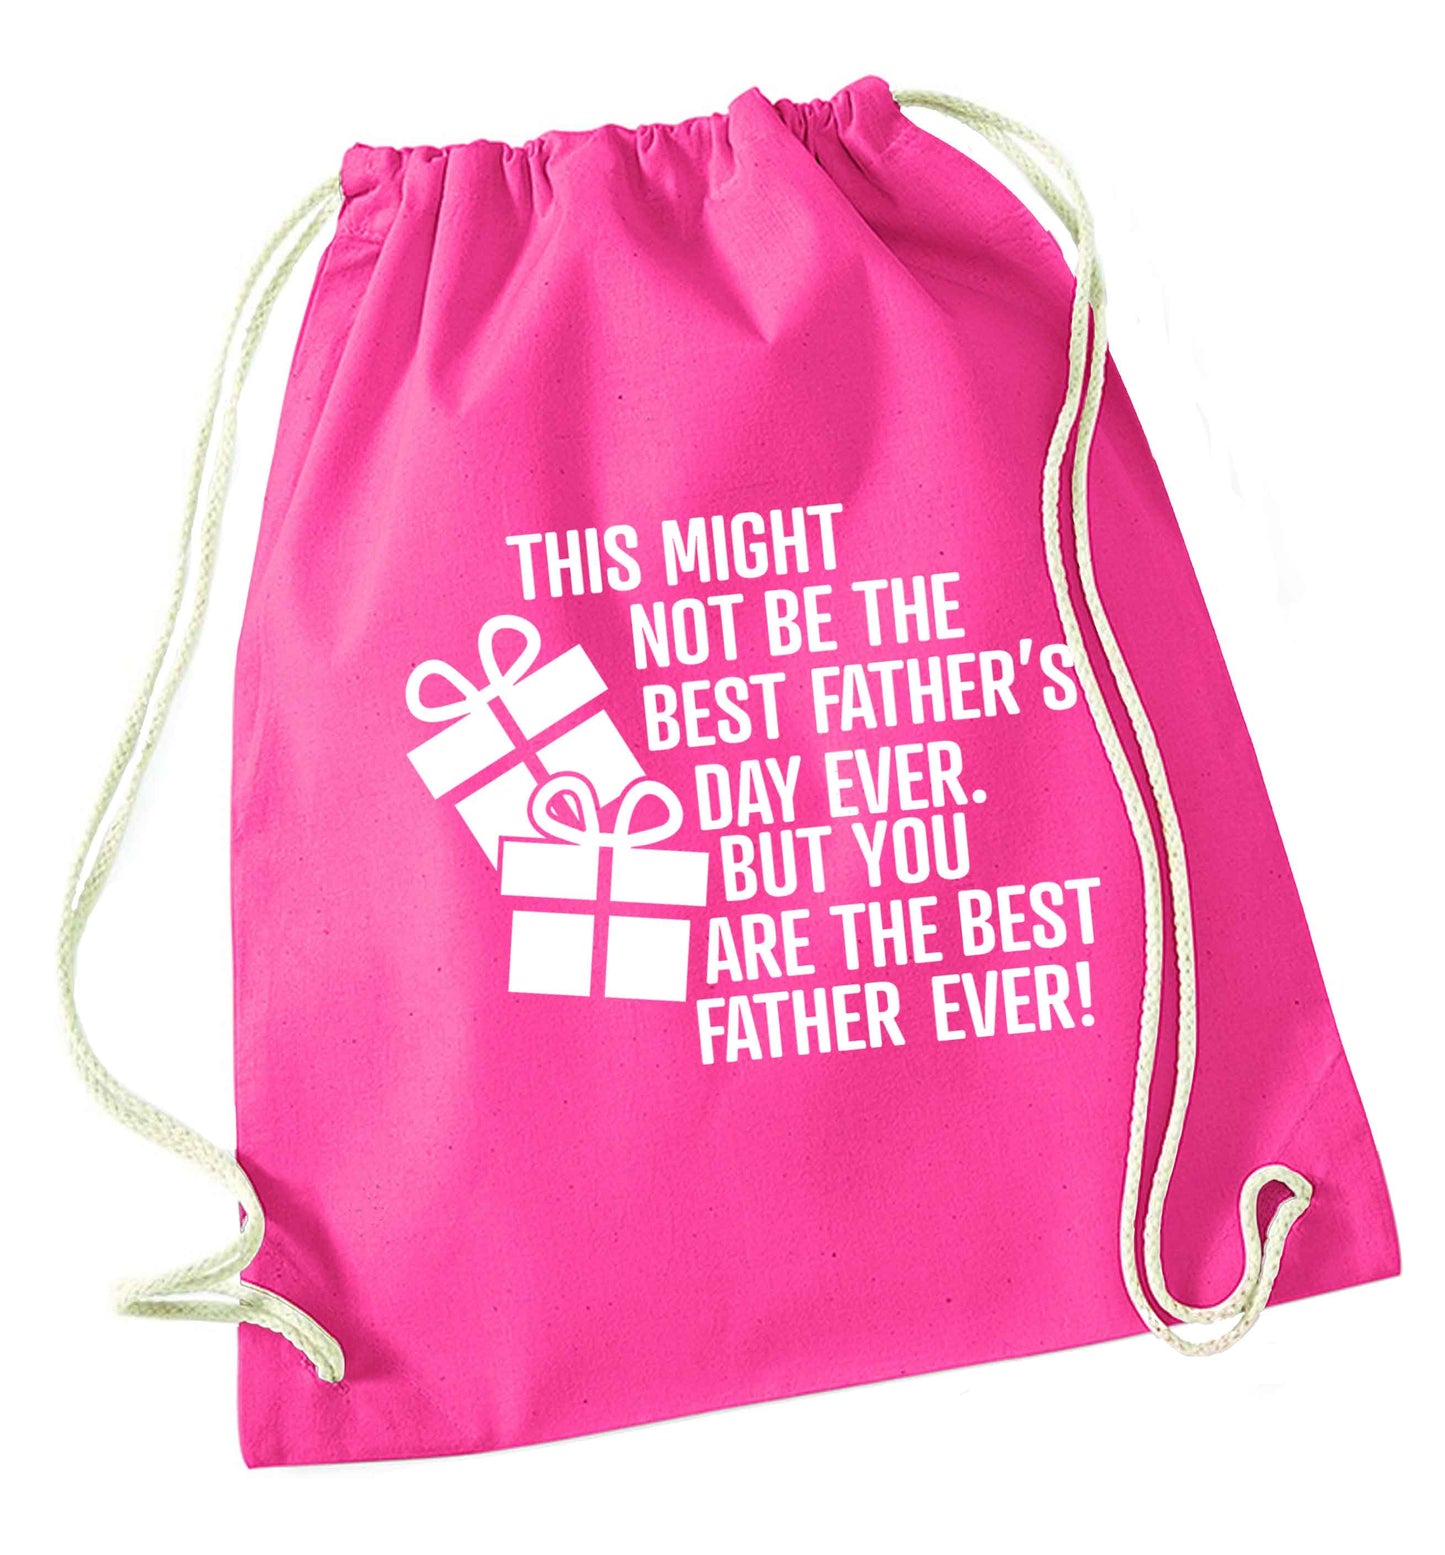 It might not be the best Father's Day ever but you are the best father ever! pink drawstring bag